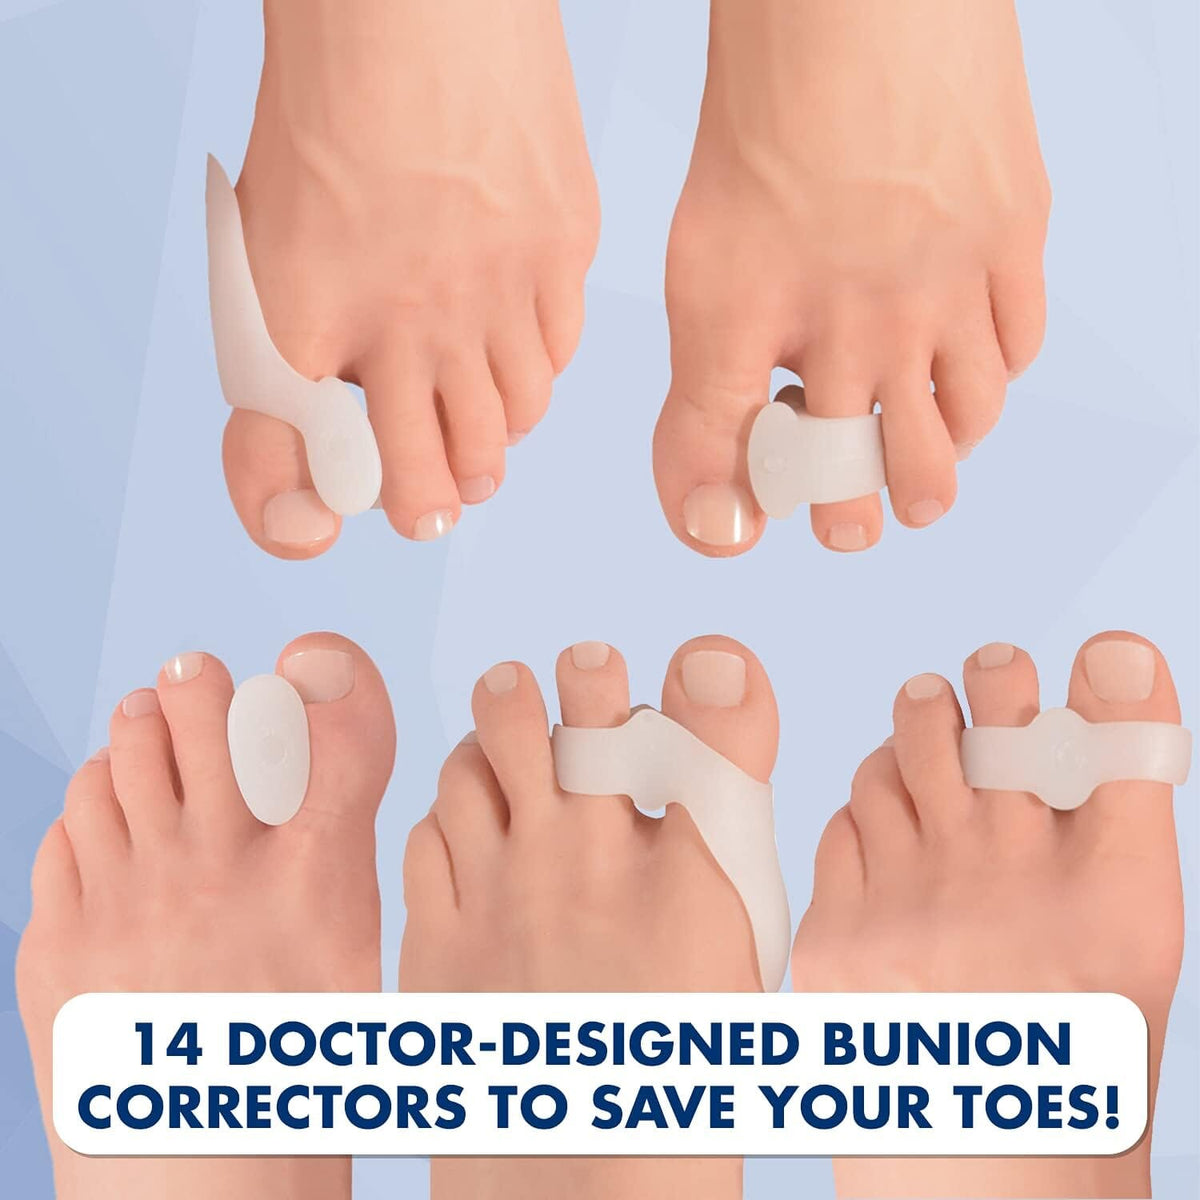 Dr. Frederick&#39;s Original 14-Piece Bunion Corrector Kit - Fast Relief for Bunions &amp; Overlapping Toes - For Men &amp; Women - Soft Gel Pads, Spacers, &amp; Separators - For No Surgery Required Foot Pain Dr. Frederick&#39;s Original 